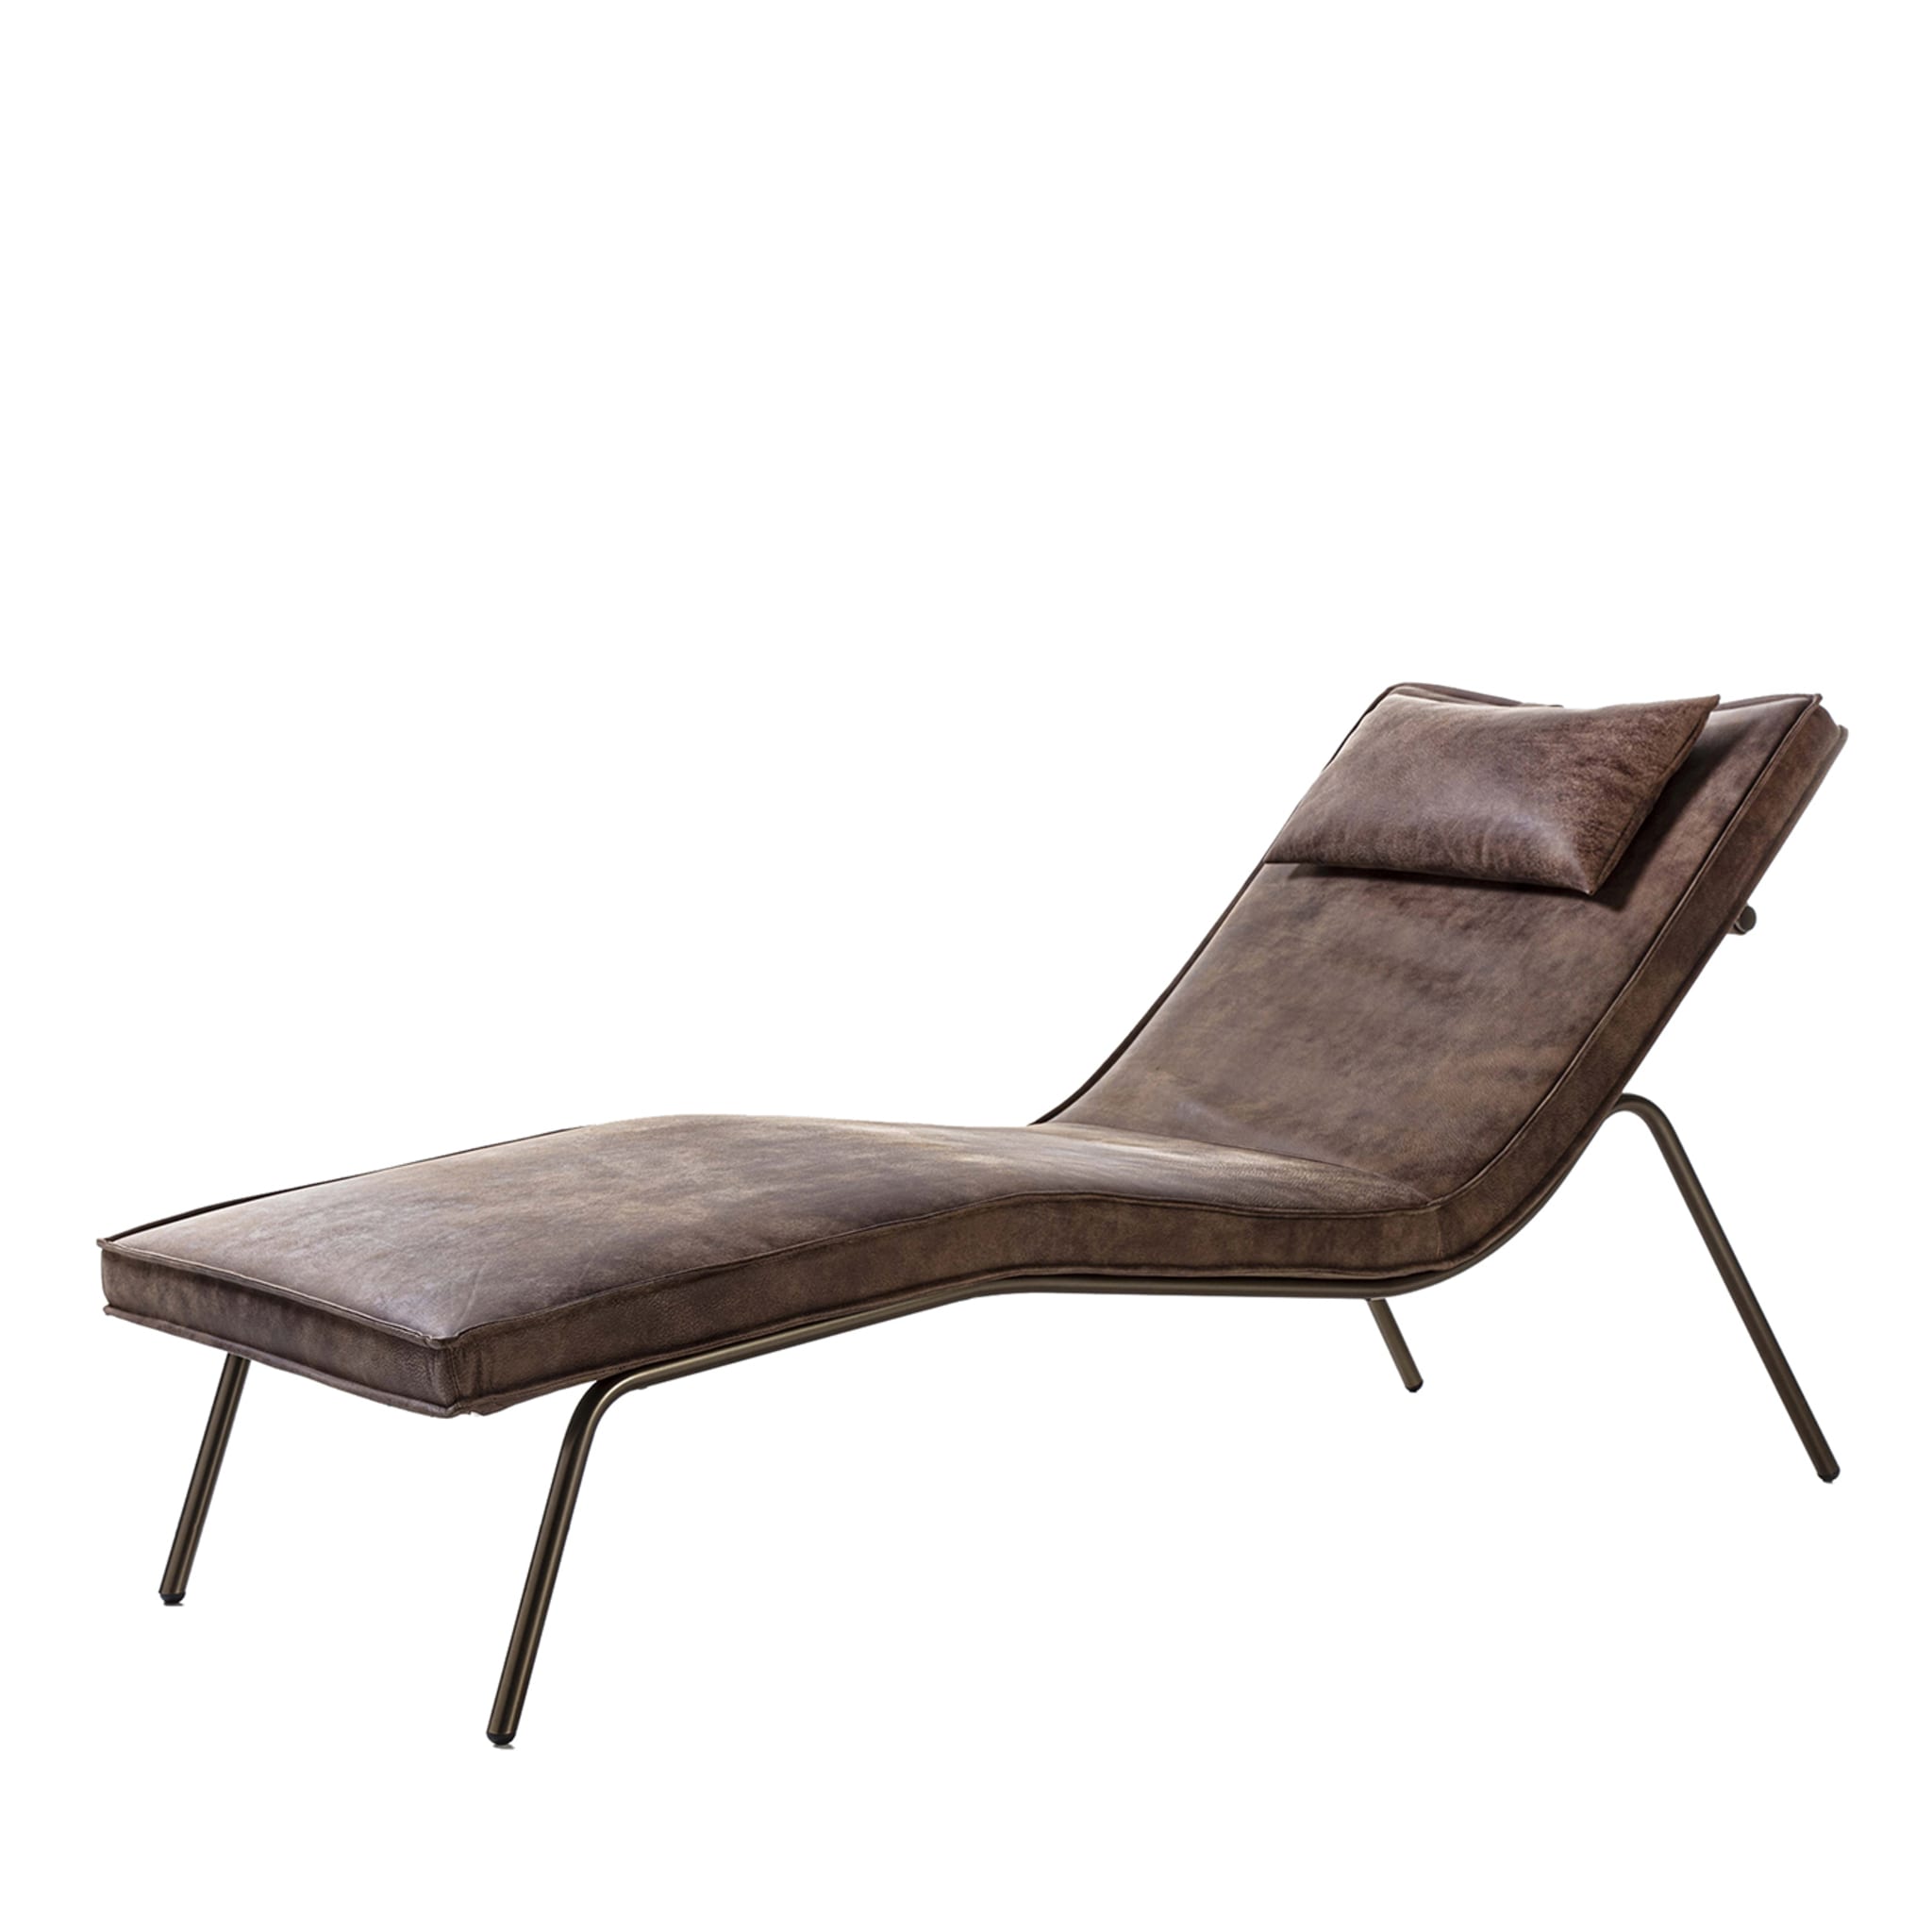 Vintage Brown Leather Chaise Longue - Main view